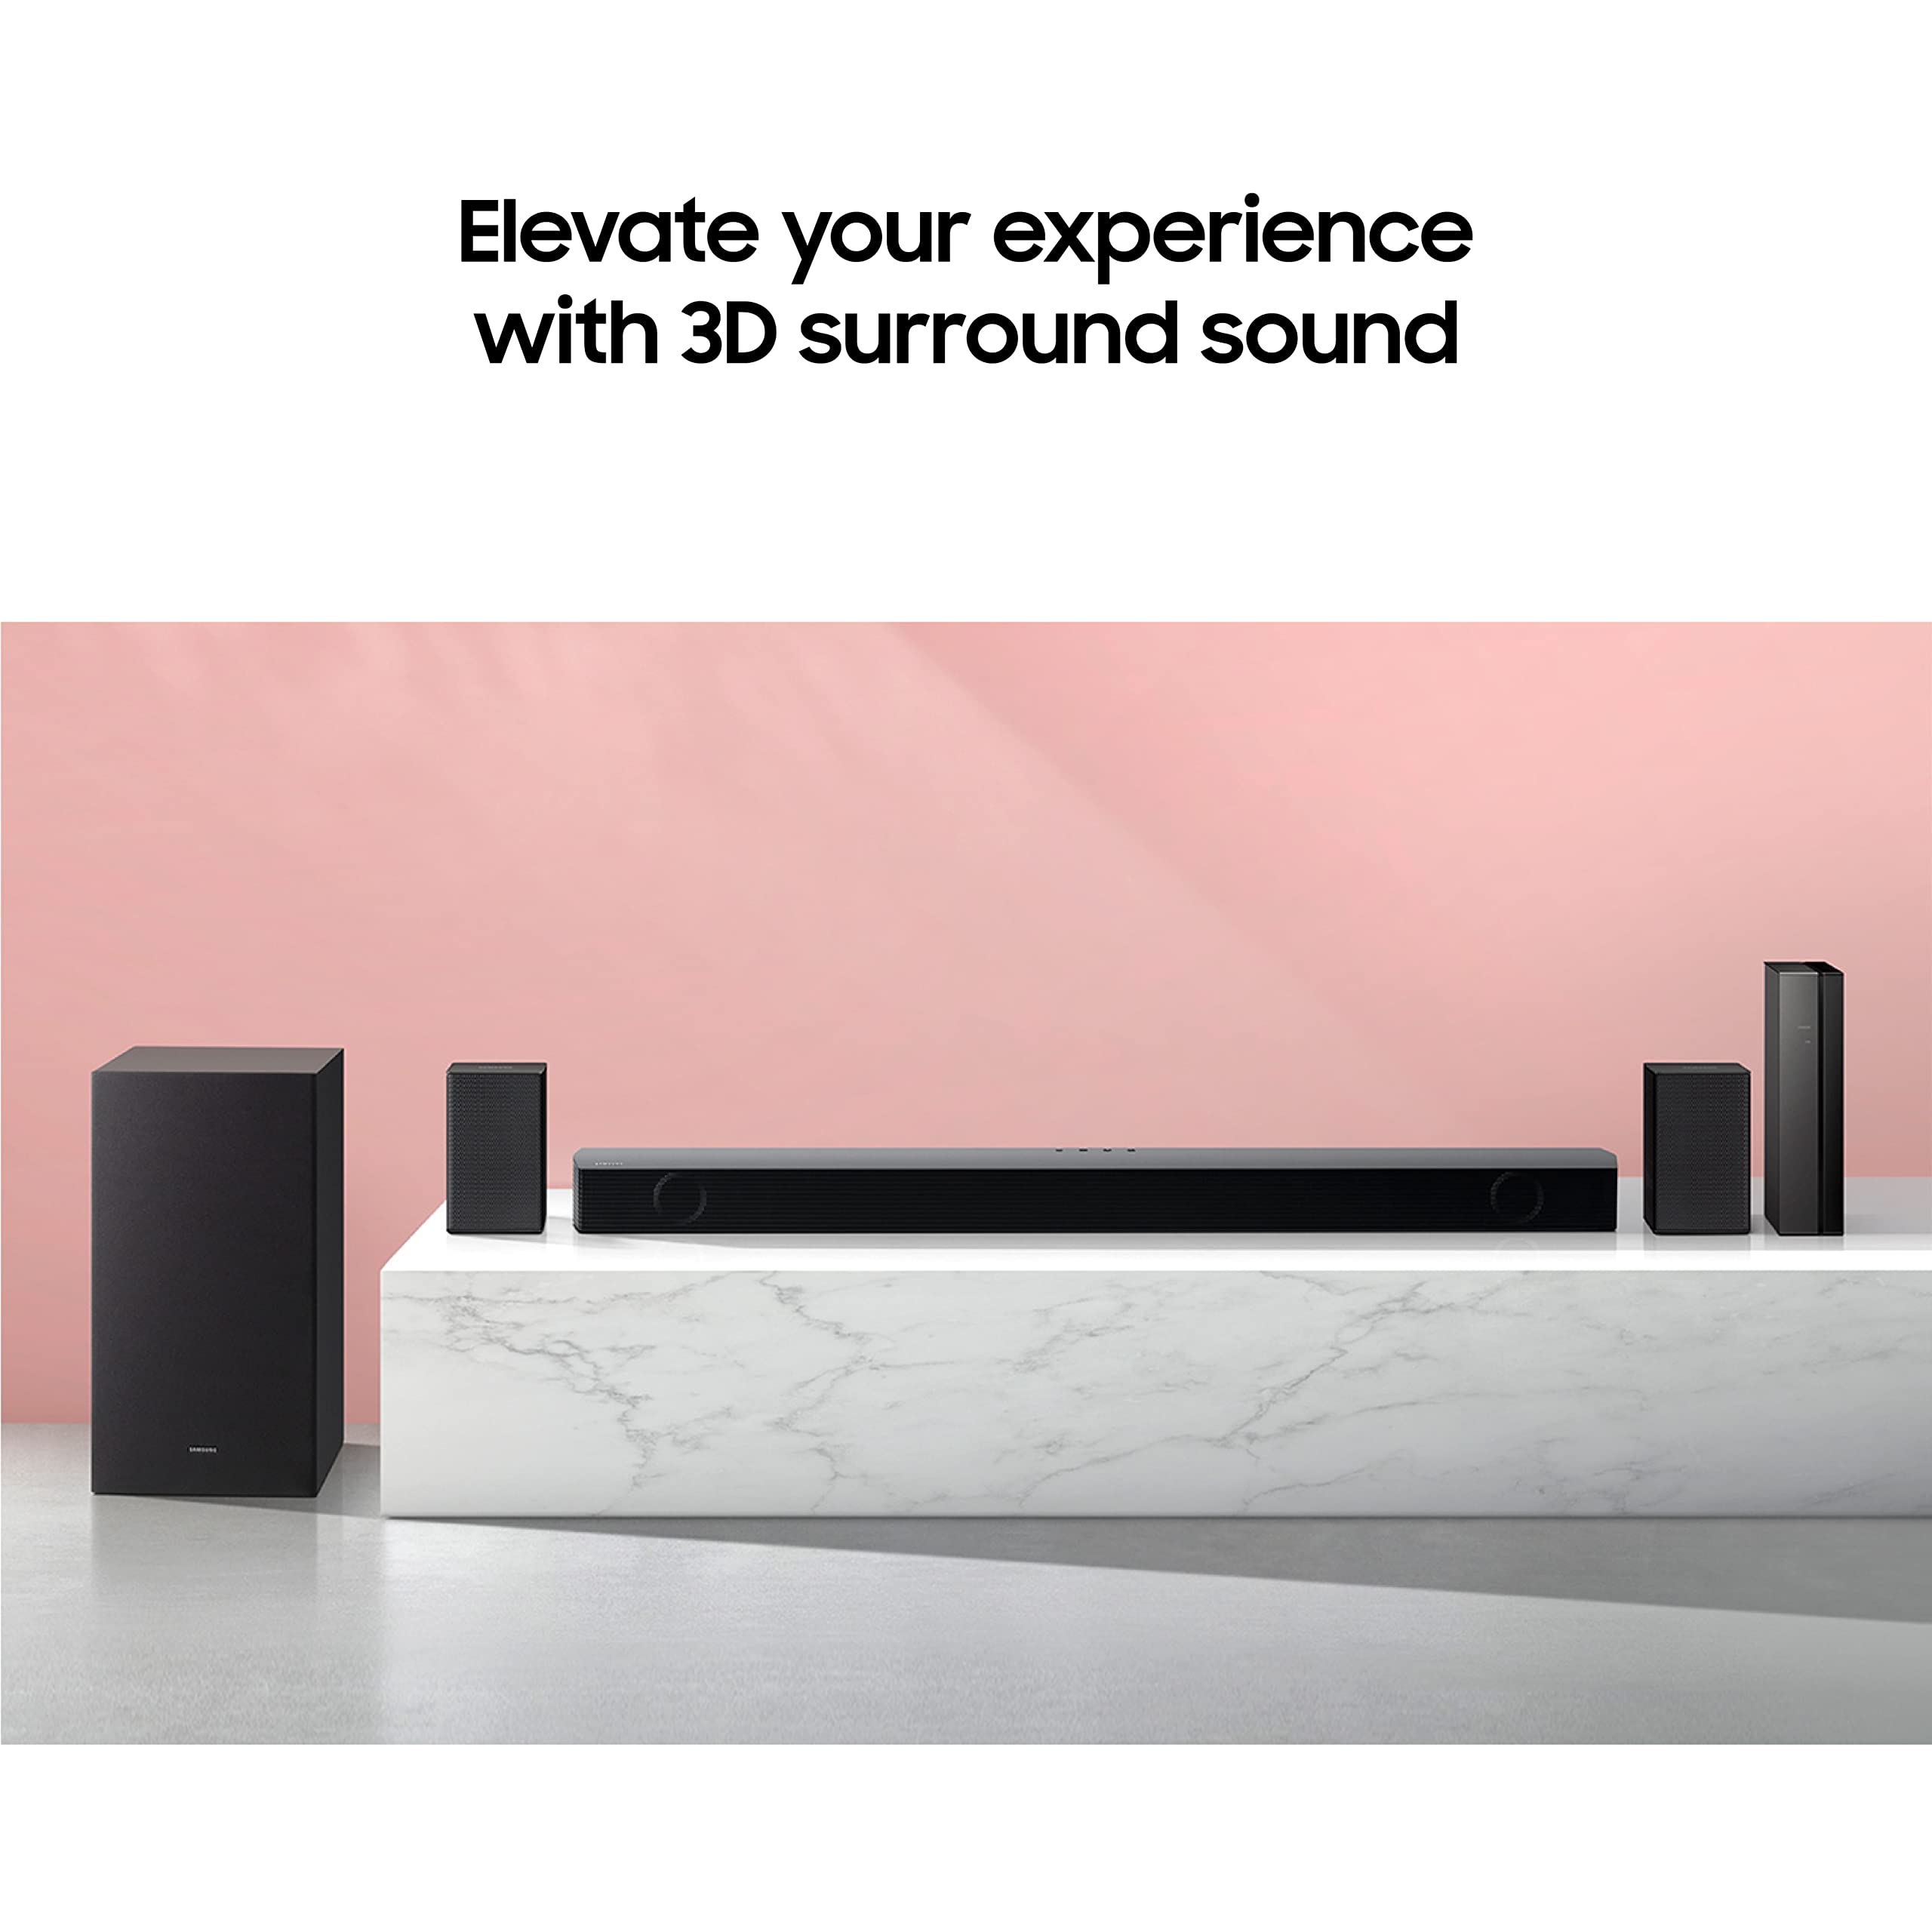 SAMSUNG HW-B57C B-Series 4.1ch Soundbar w/Dolby Audio/DTS Virtual X, Game Mode, Wireless Bluetooth TV Connection, Rear Speaker Kit & Subwoofer Included